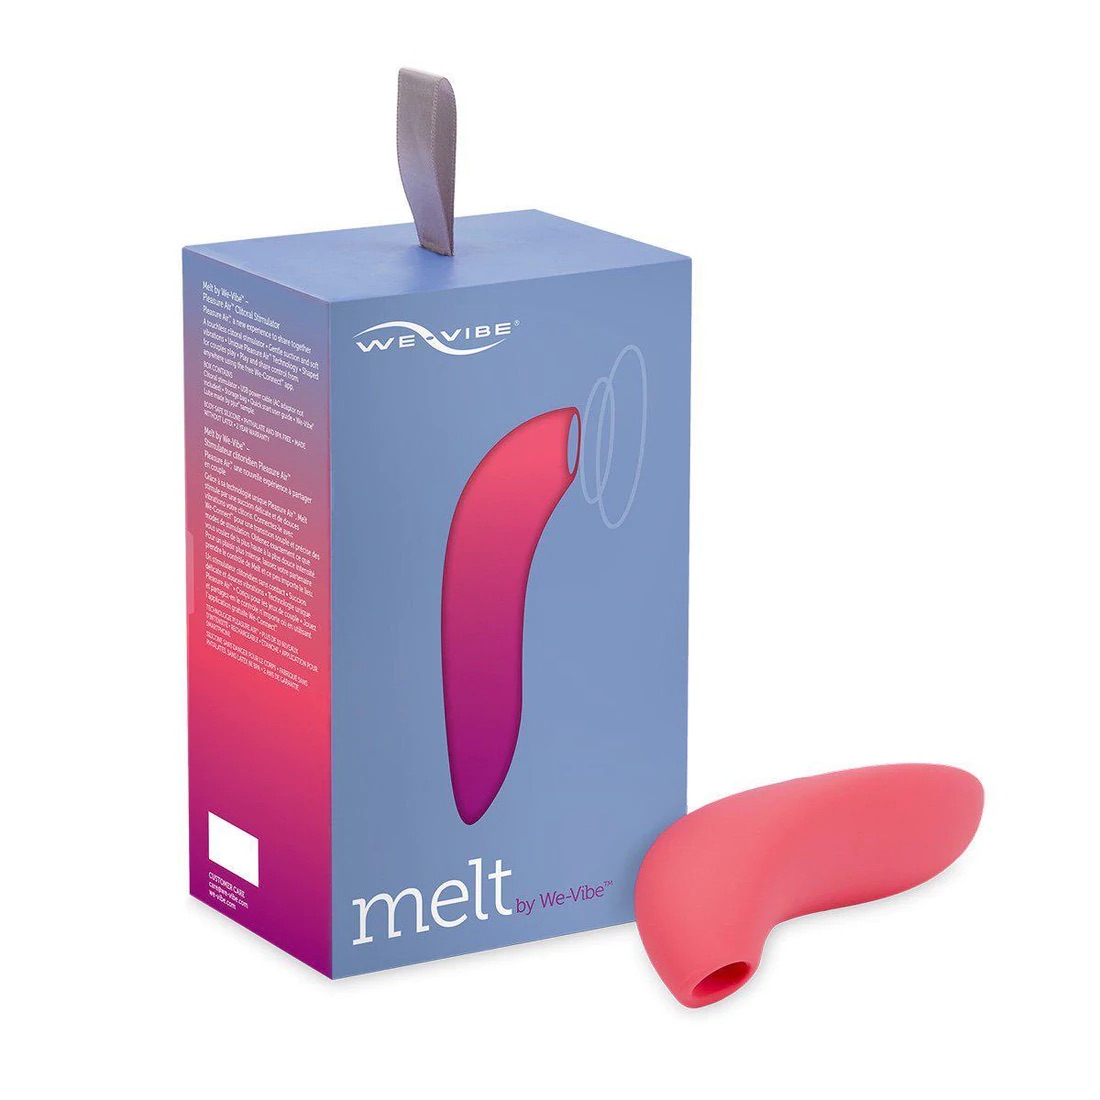 The We-Vibe Melt: A blue-gray box with a gray handle on top sits next to a pink suction vibrator. The vibrator features a short thin handle and a wide head with a circular suction cup for clitoral stimulation.